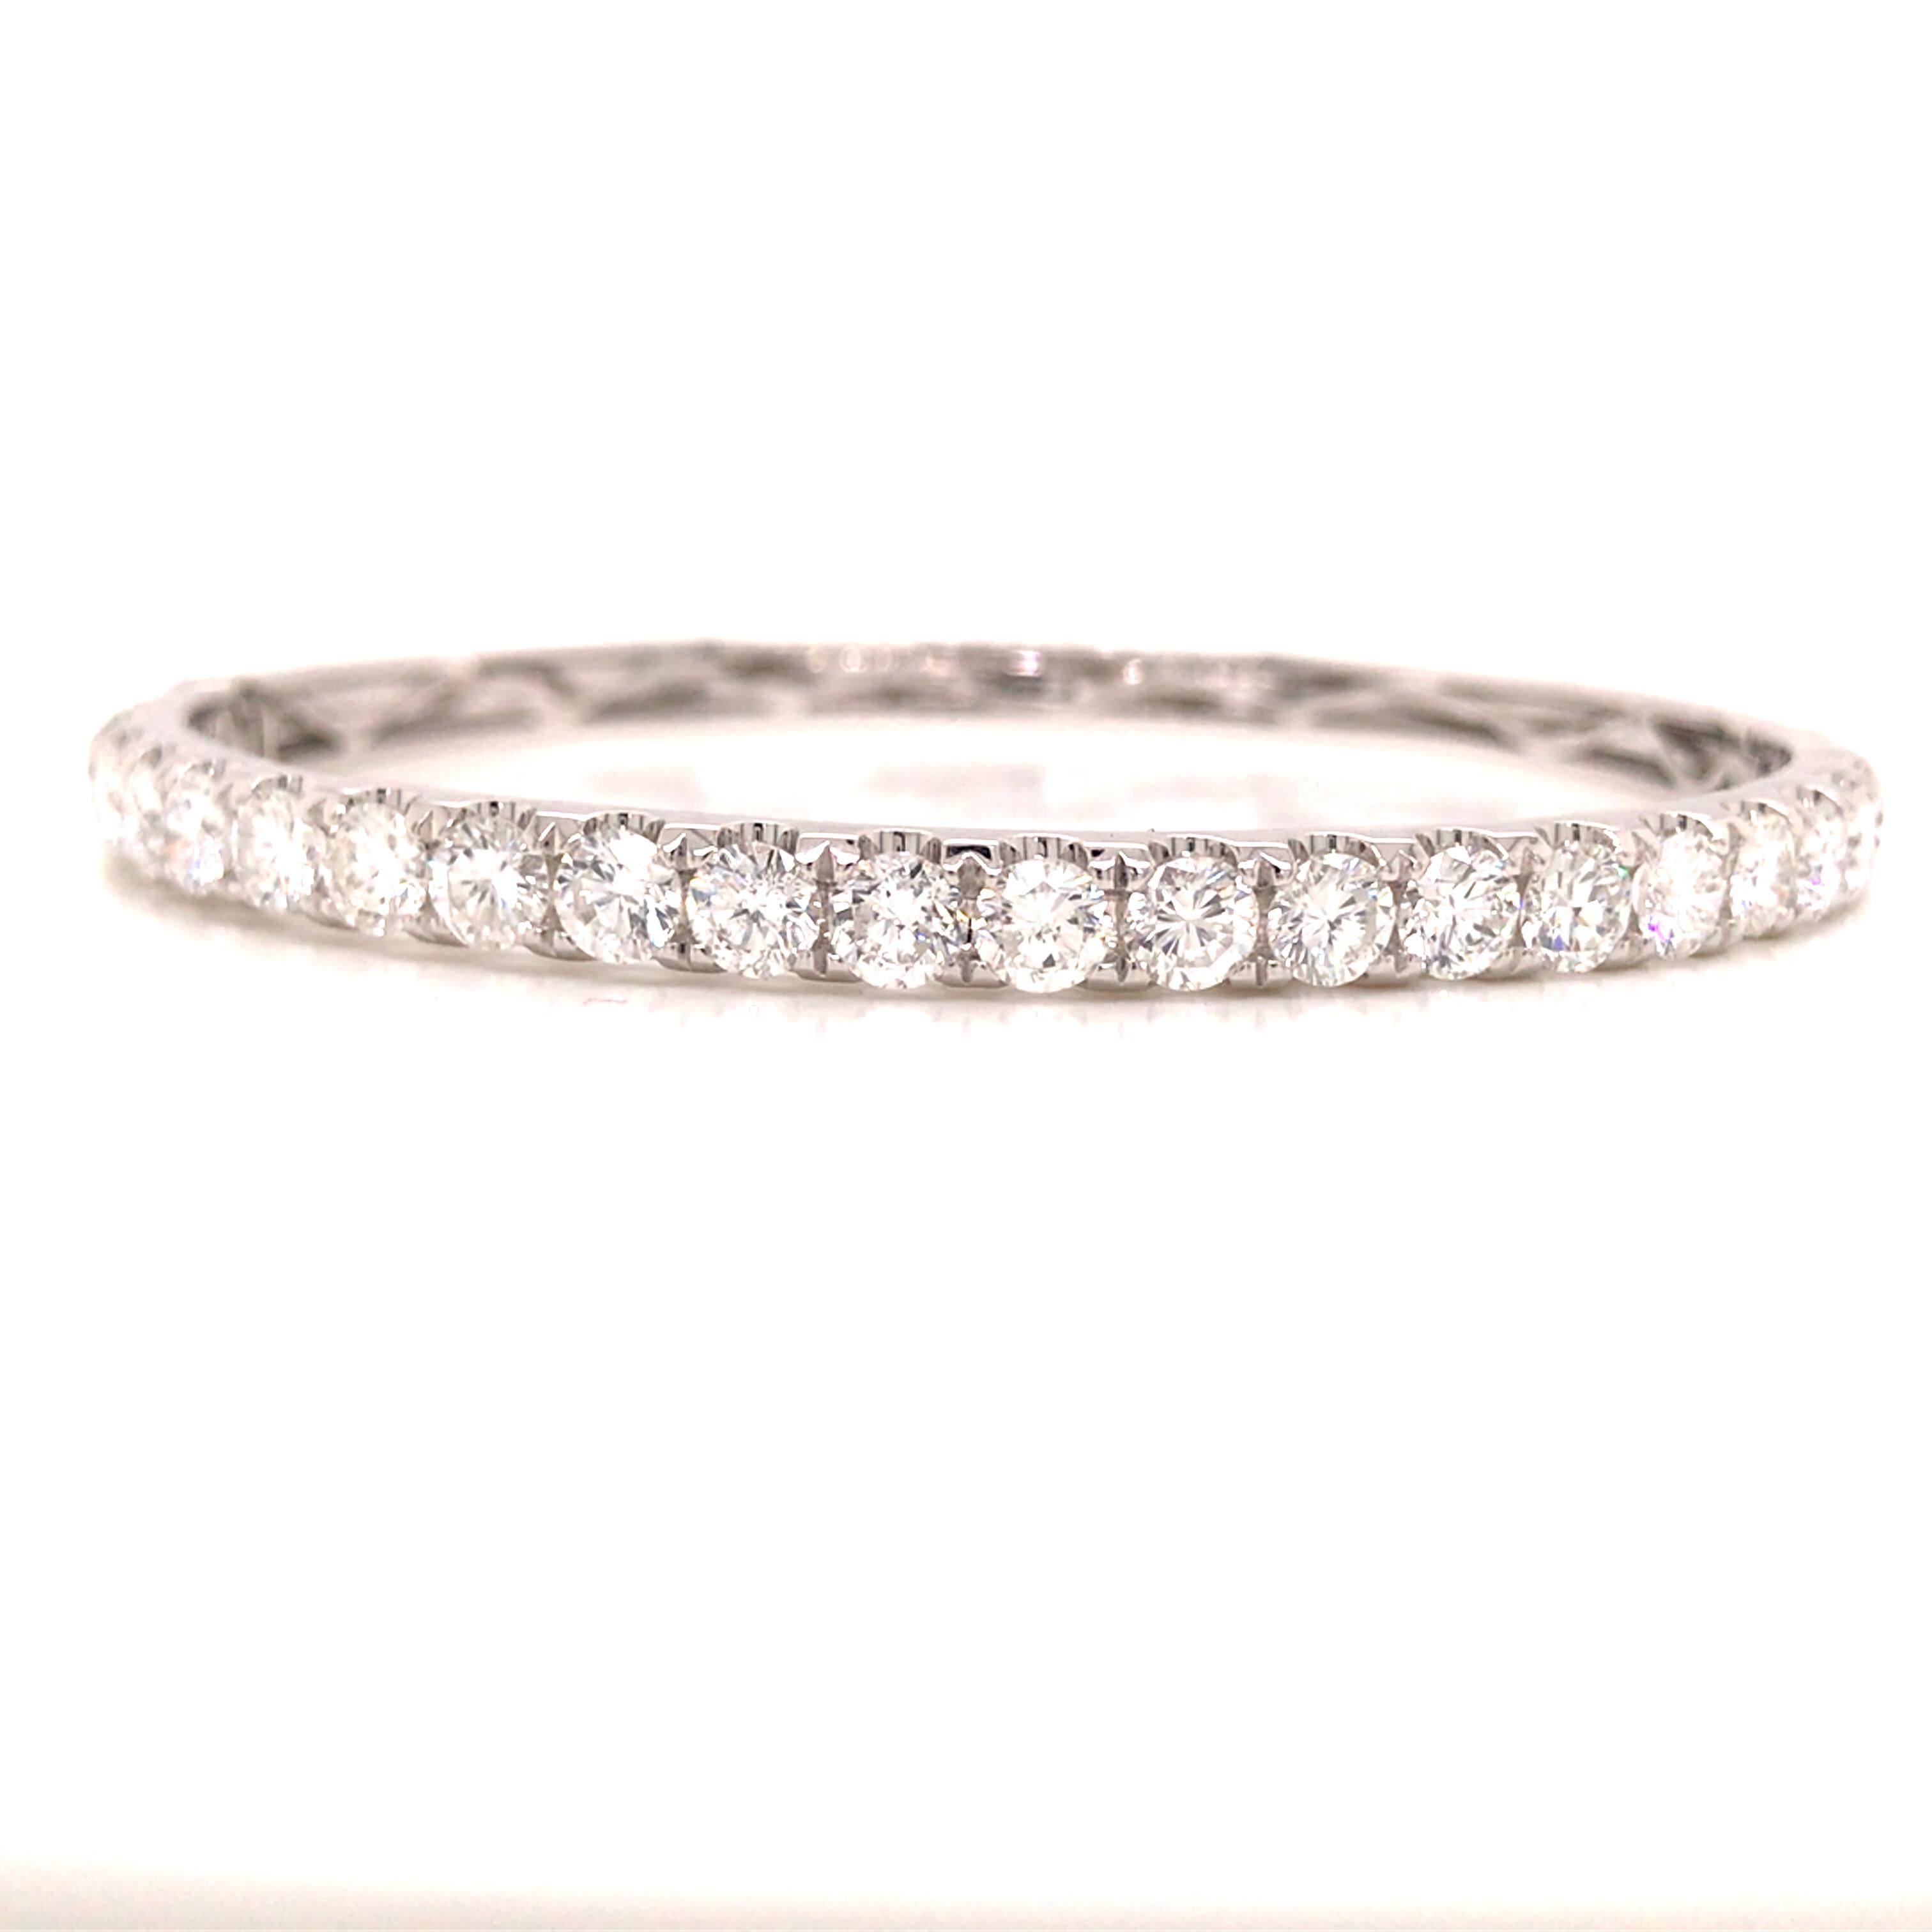 Diamond Bangle Bracelet in 18K White Gold. (21) Round Brilliant Cut Diamonds weighing 5.0 carat total weight, G-H in color and VS-SI in clarity. The Bangle measures 6.25 inch inner circumference and 3/16 inch in width. 17.10 grams.